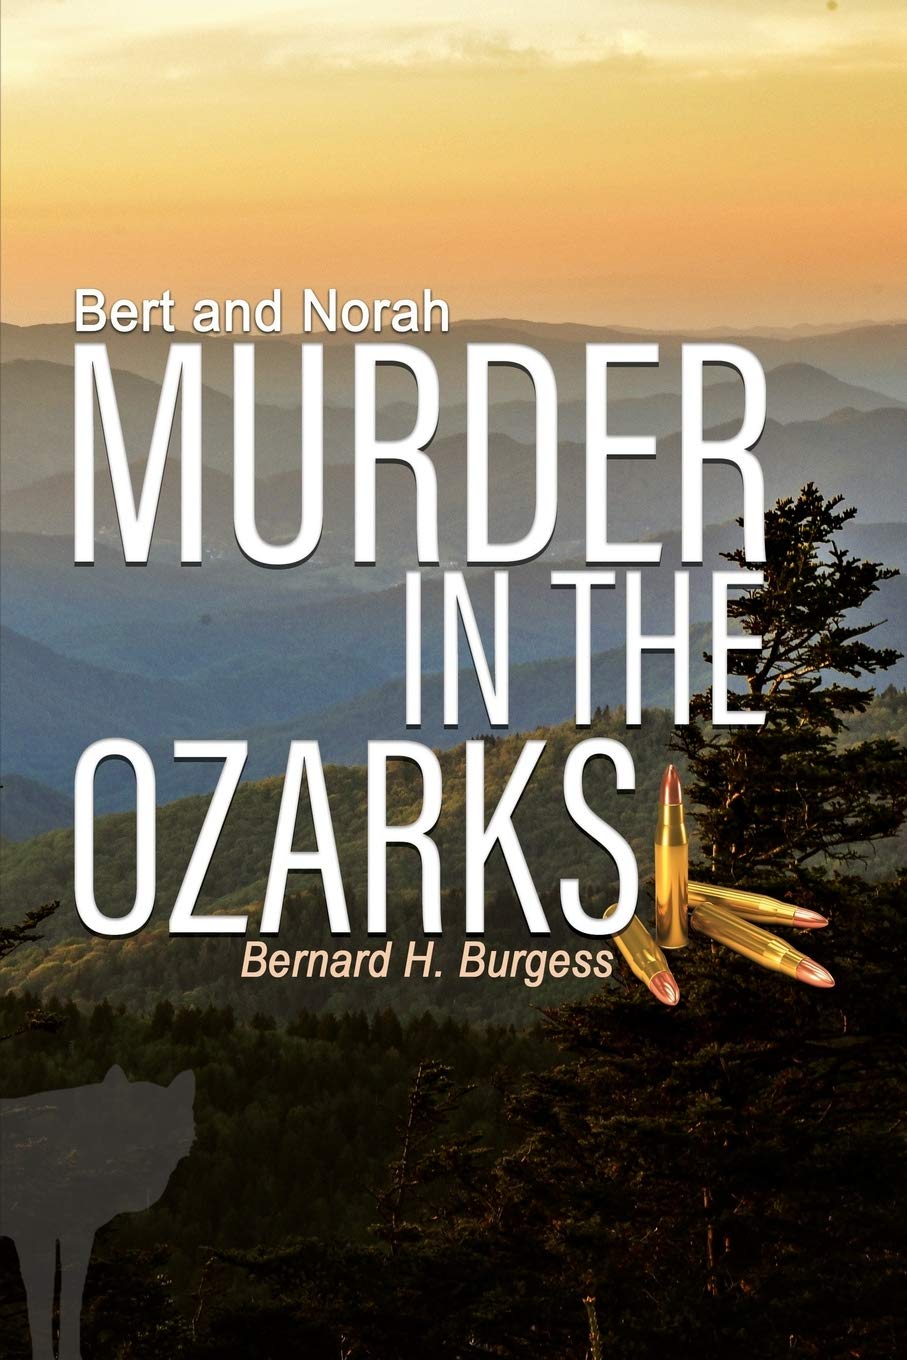 The front cover of Bert and Norah: Murder in the Ozarks by Bernard Burgess